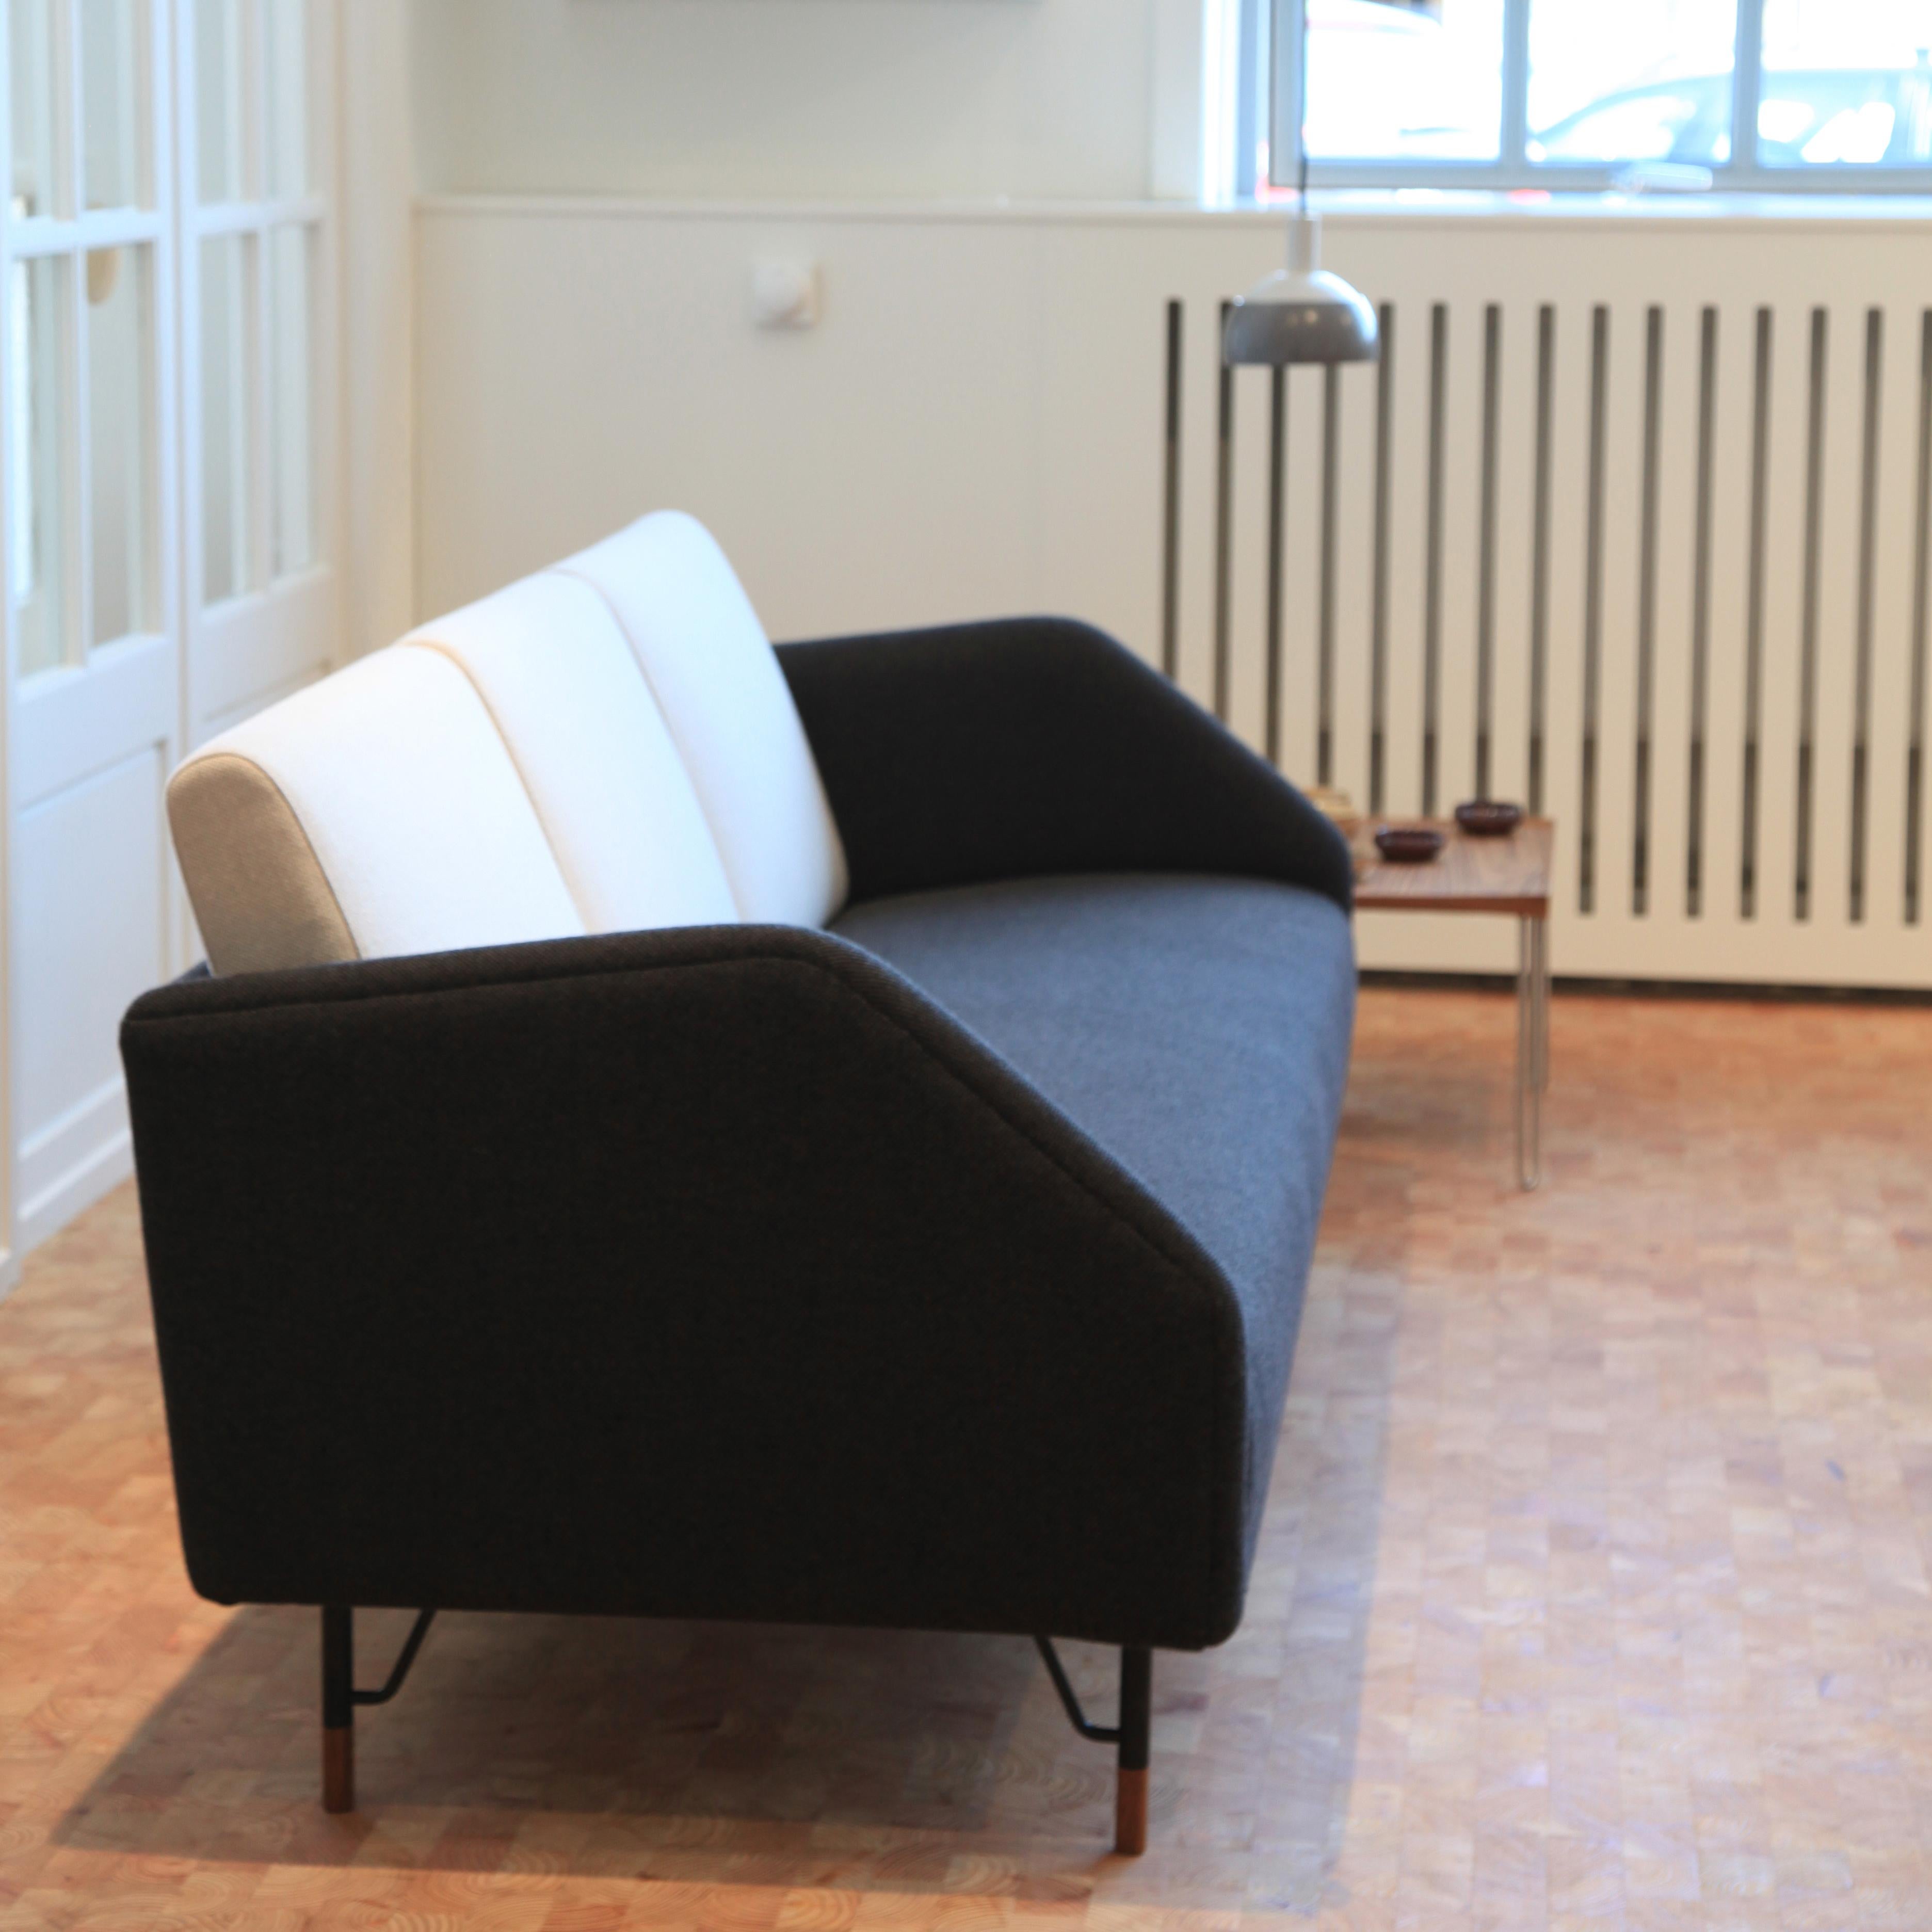 Finn Juhl 2-Seat 77 Sofa Couch, Wood and Fabric 2